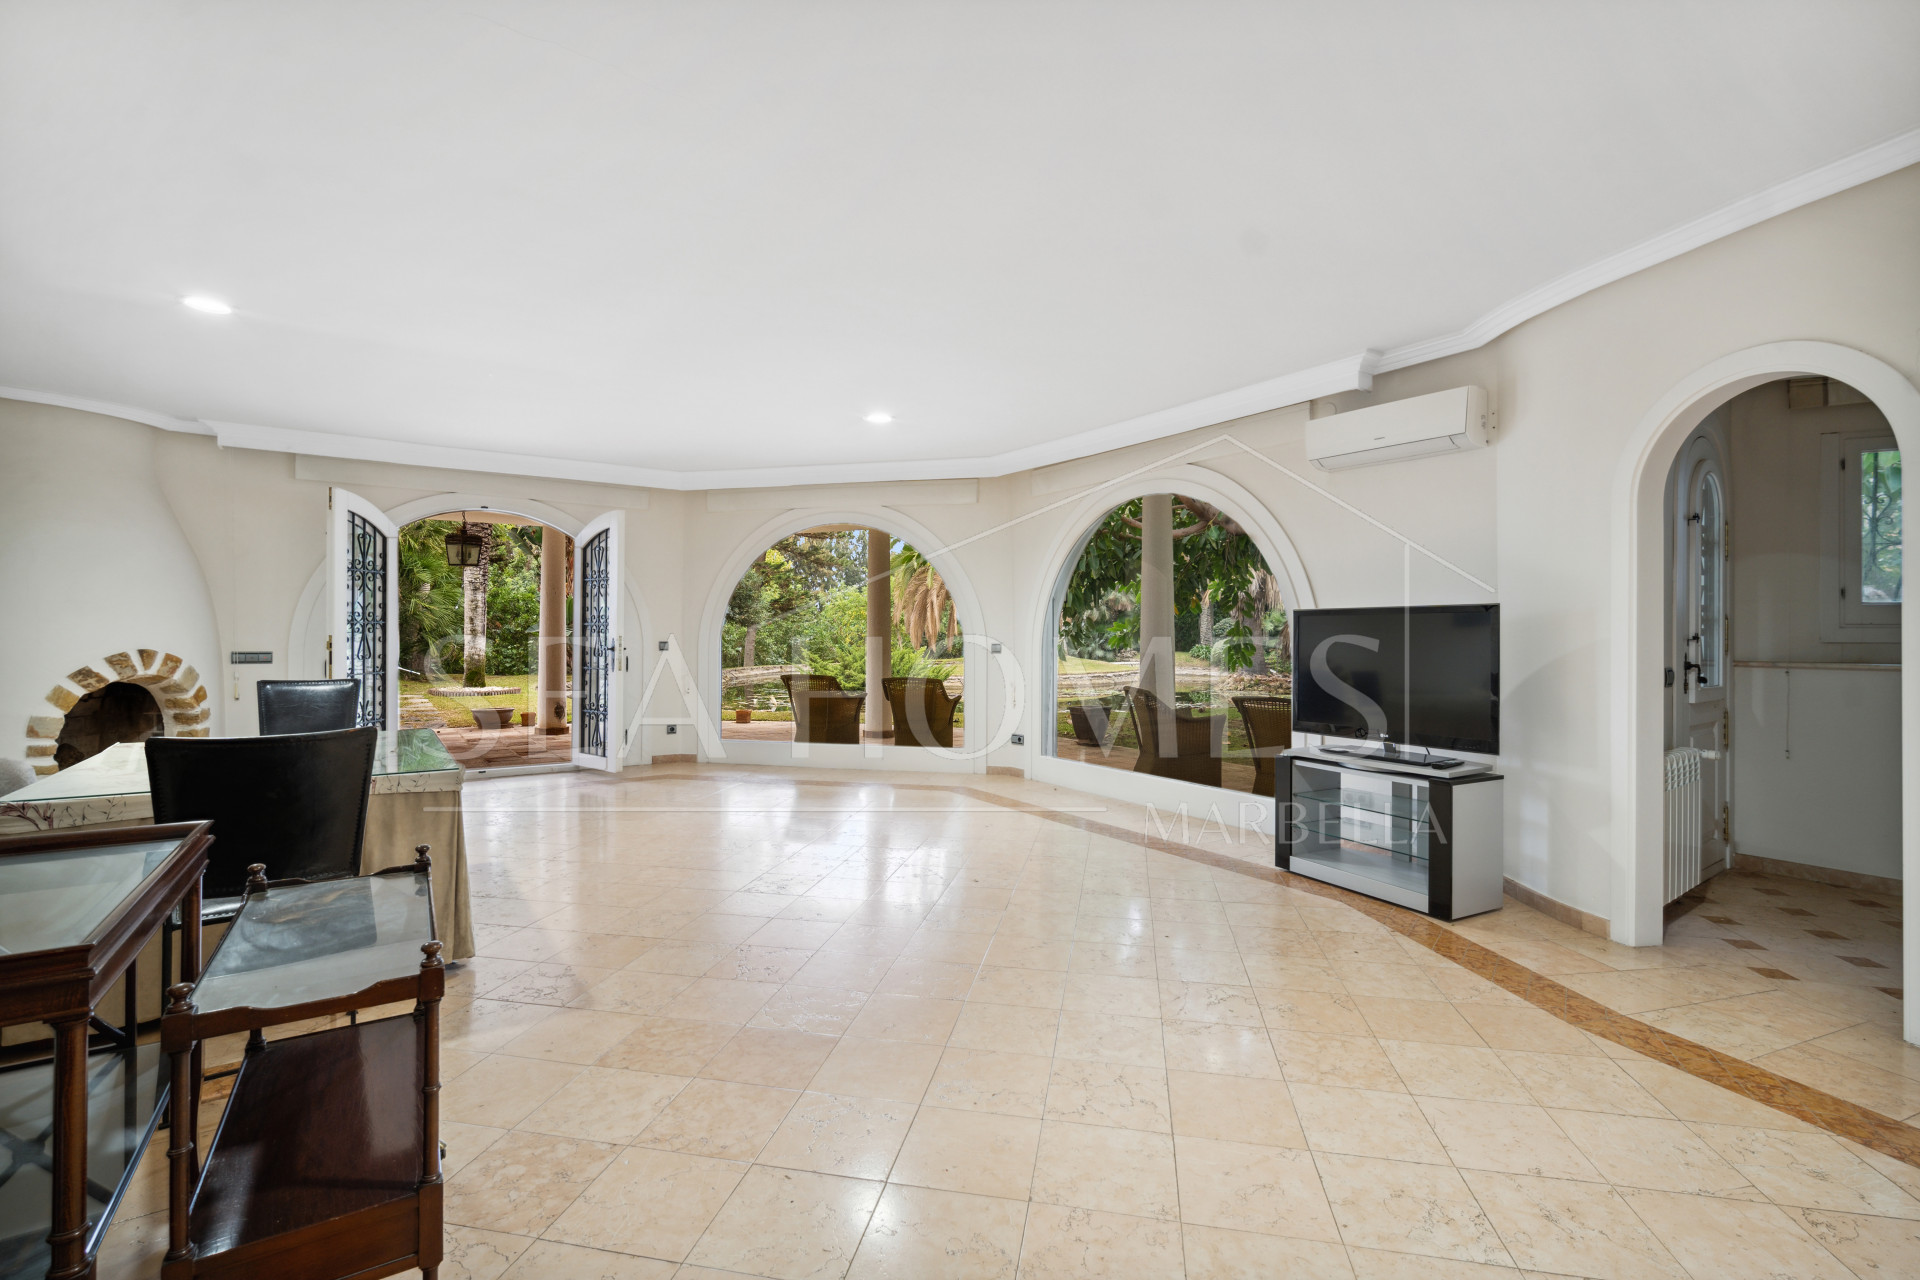 Fantastic four bedroom, south facing, Andalucian style villa in Nagueles, Marbella